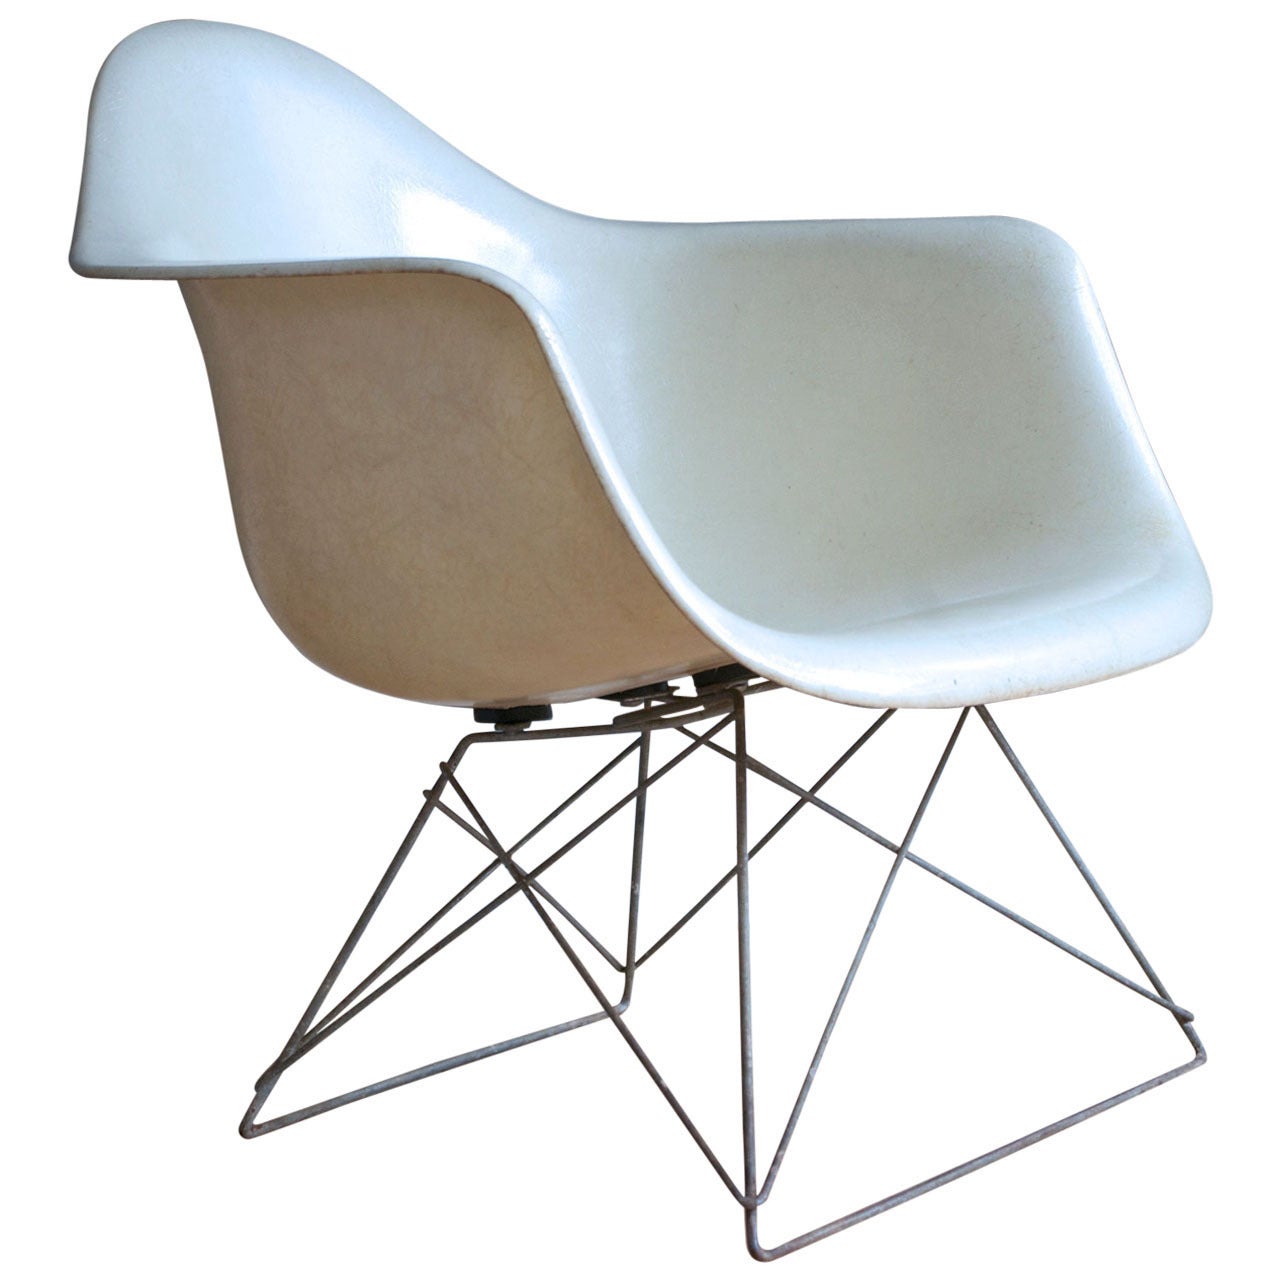 Eames LAR Chair with Cat's Cradle Base